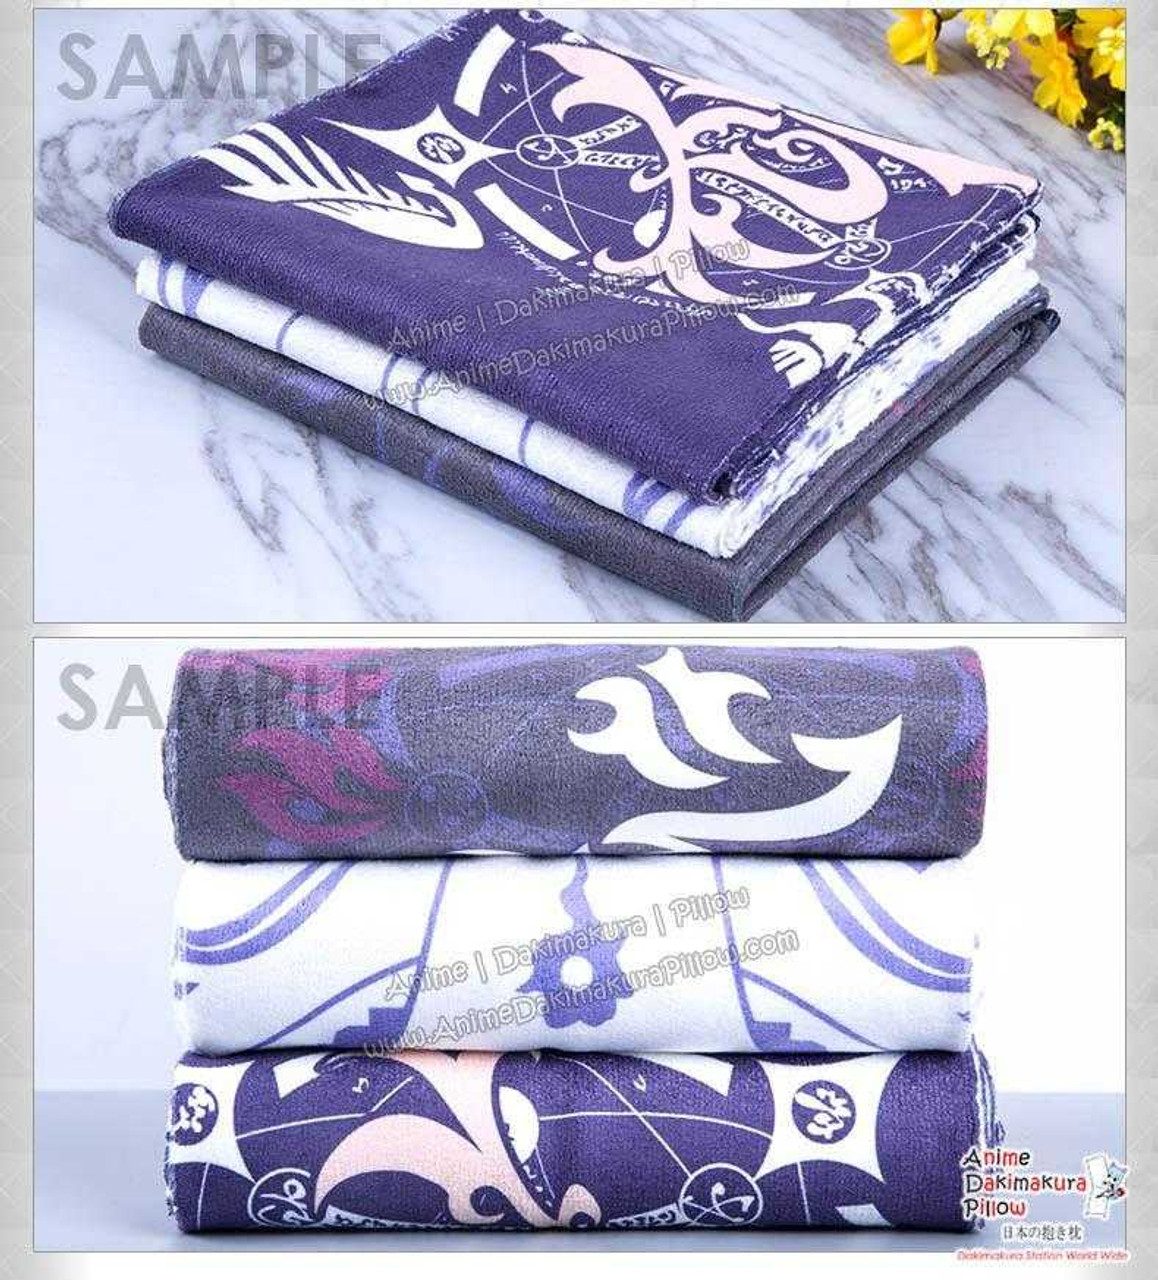 https://cdn11.bigcommerce.com/s-linp765zrx/images/stencil/1280x1280/products/18207/260646/New-Ruler-Japanese-Anime-Soft-Quick-Dry-and-Highly-Absorbent-Towel-ADP-7104224022-Anime-Dakimakura-Pillow-Shop-MGF-1_123235__90321.1669895241.jpg?c=1